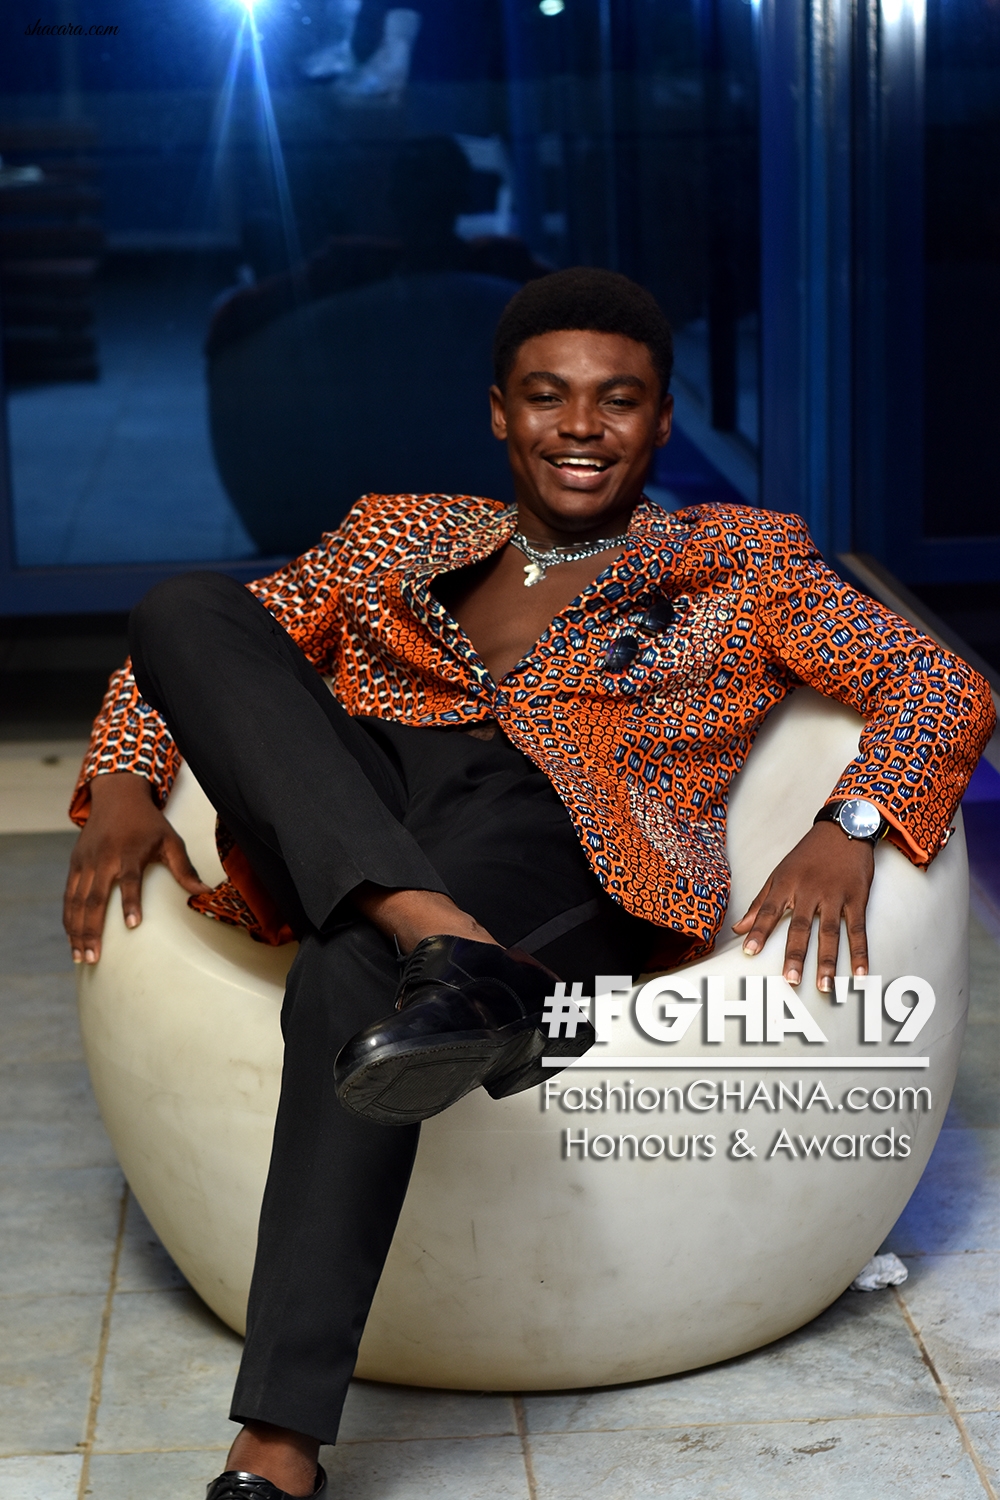 FashionGHANA Wows Gh Fashion Industry With 2019 Awards Night On The Roof Top!